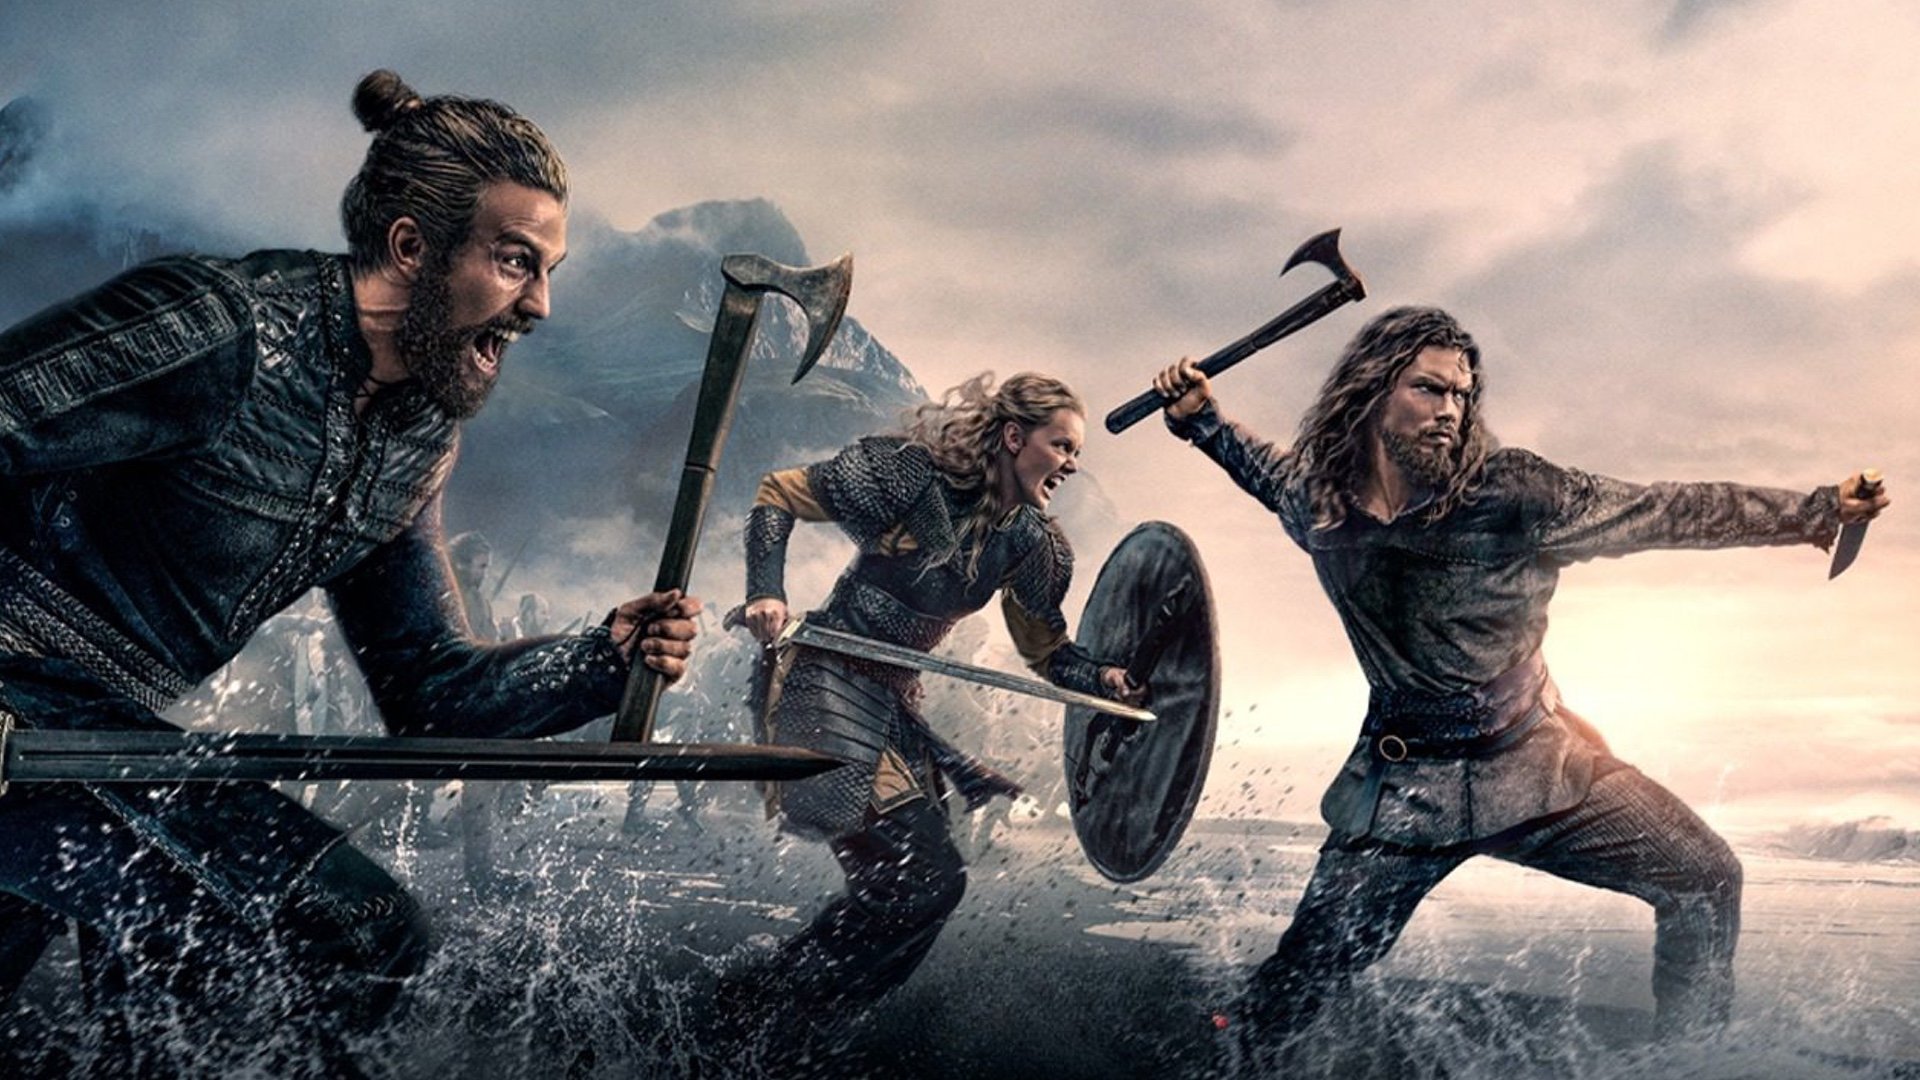 Vikings: Valhalla Cast & Character Guide